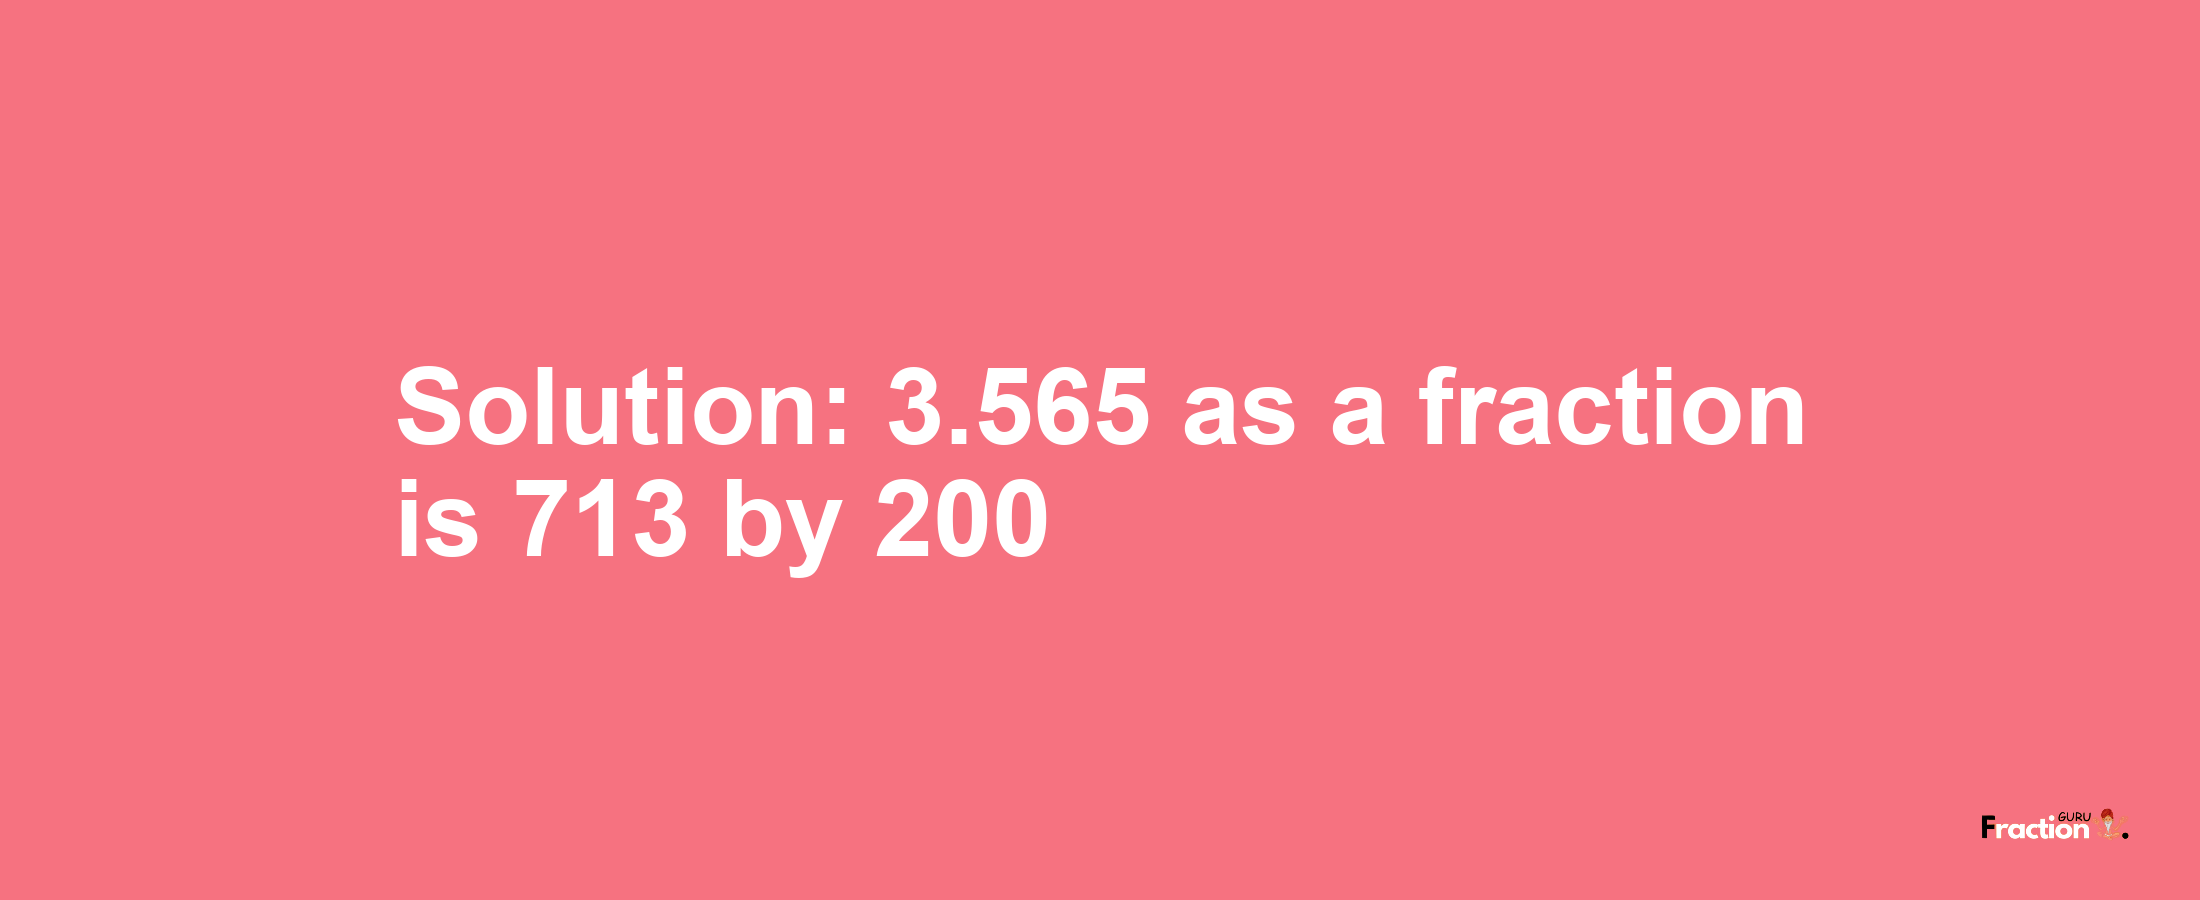 Solution:3.565 as a fraction is 713/200